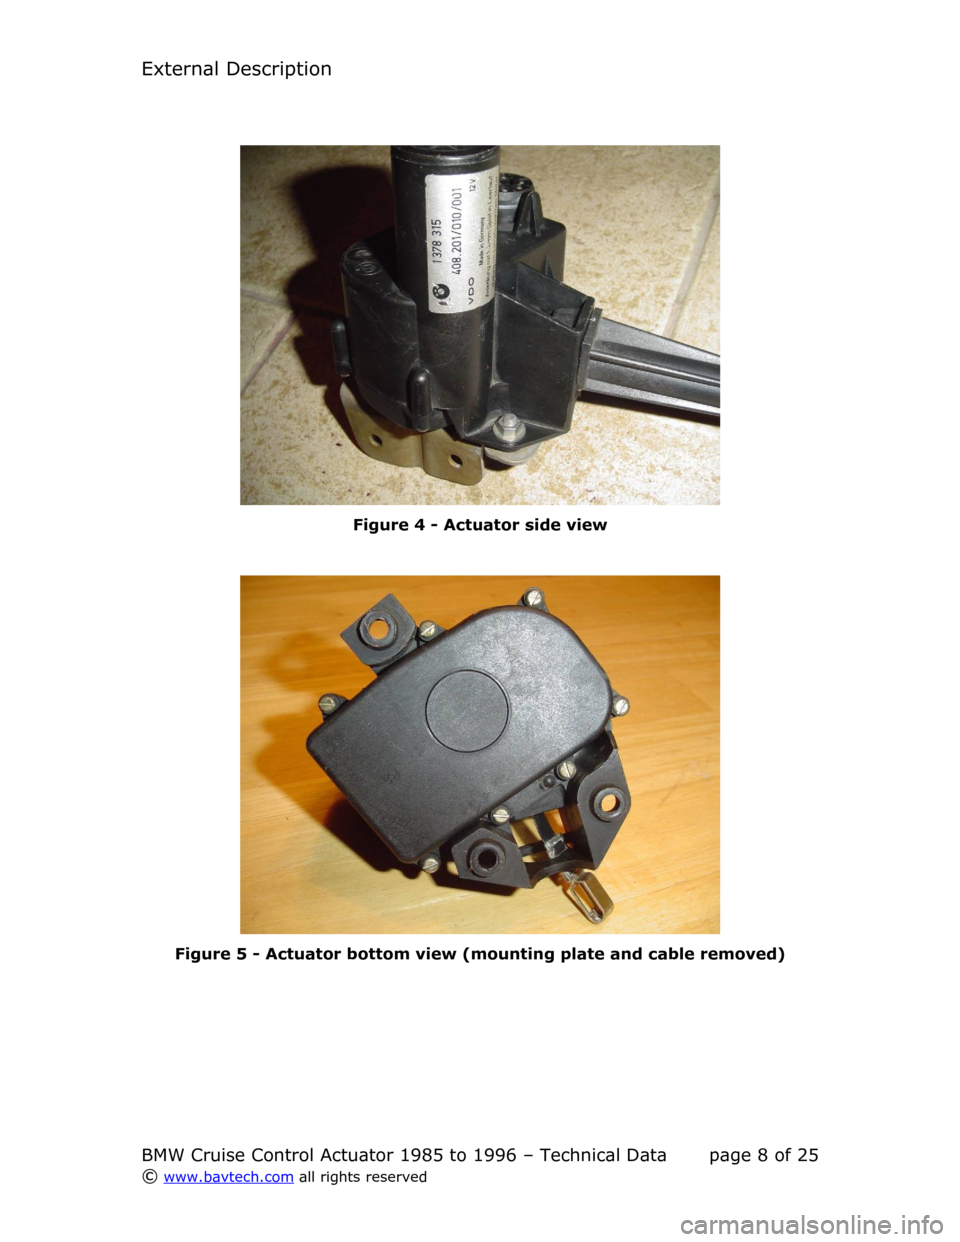 BMW 3 SERIES 1991 E36 Cruise Control Acutator Technical Data Workshop Manual External Description
Figure  4  - Actuator side view
Figure  5  - Actuator bottom view (mounting plate and cable removed)
BMW Cruise Control Actuator 1985 to 1996 – Technical Data page  8  of  25
©